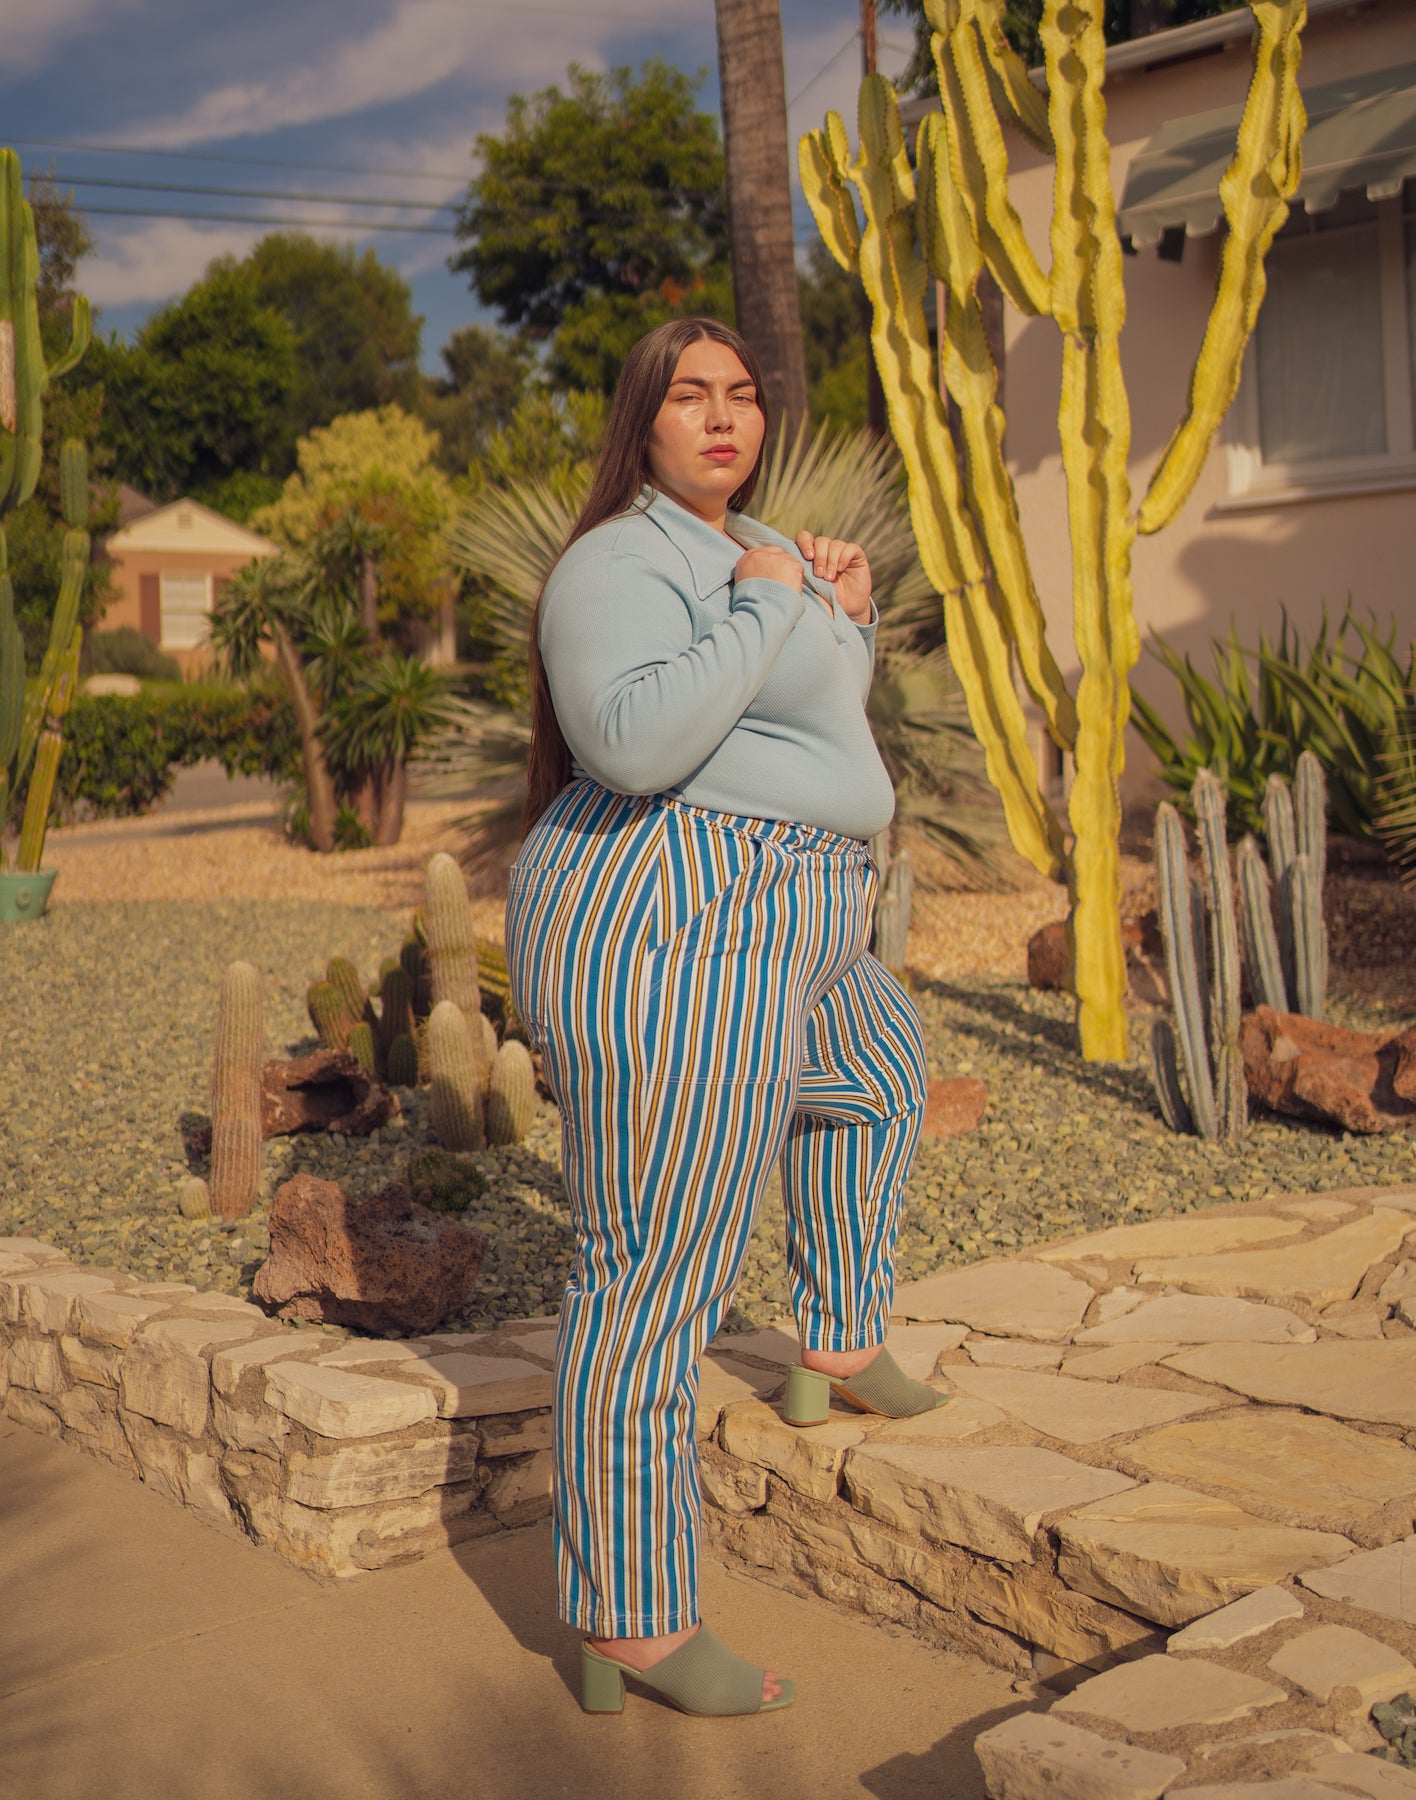 Marielena is wearing Long Sleeve Fisherman Polo in Baby Blue and Stripe Work Pants in Blue/Yellow